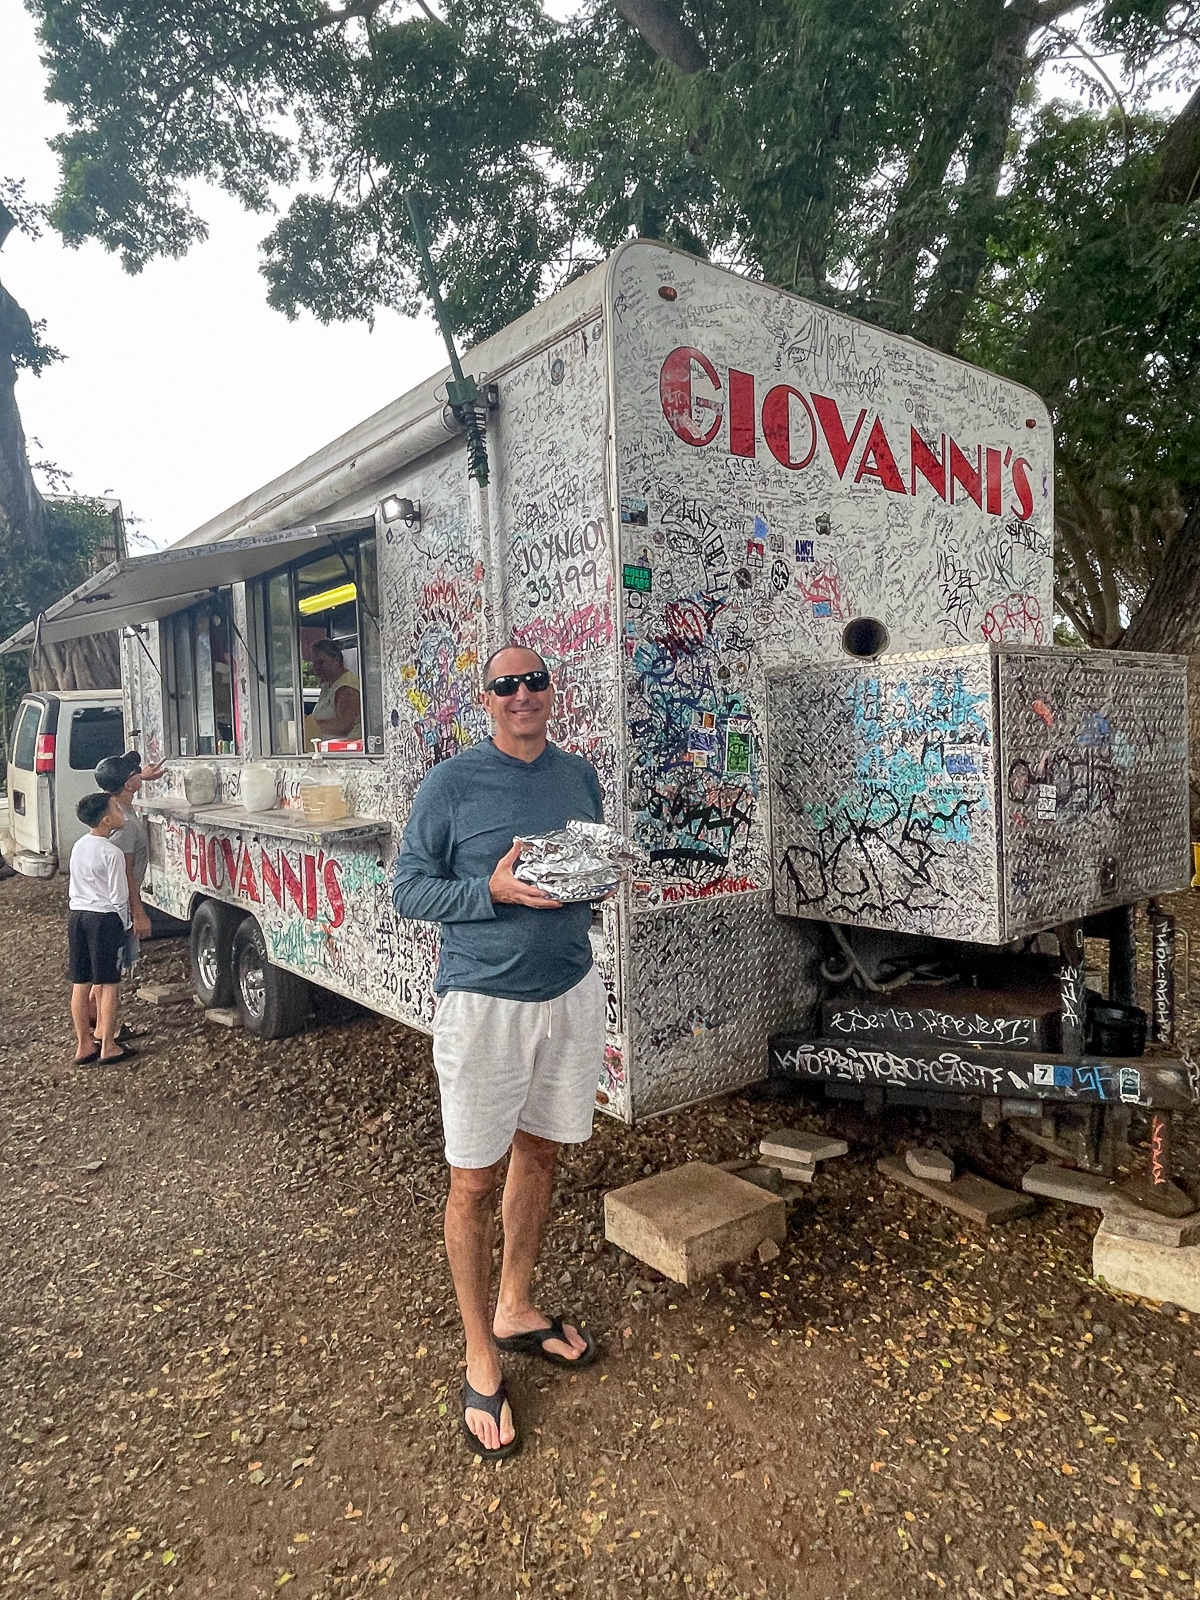 Mike outside Giovanni's food truck.